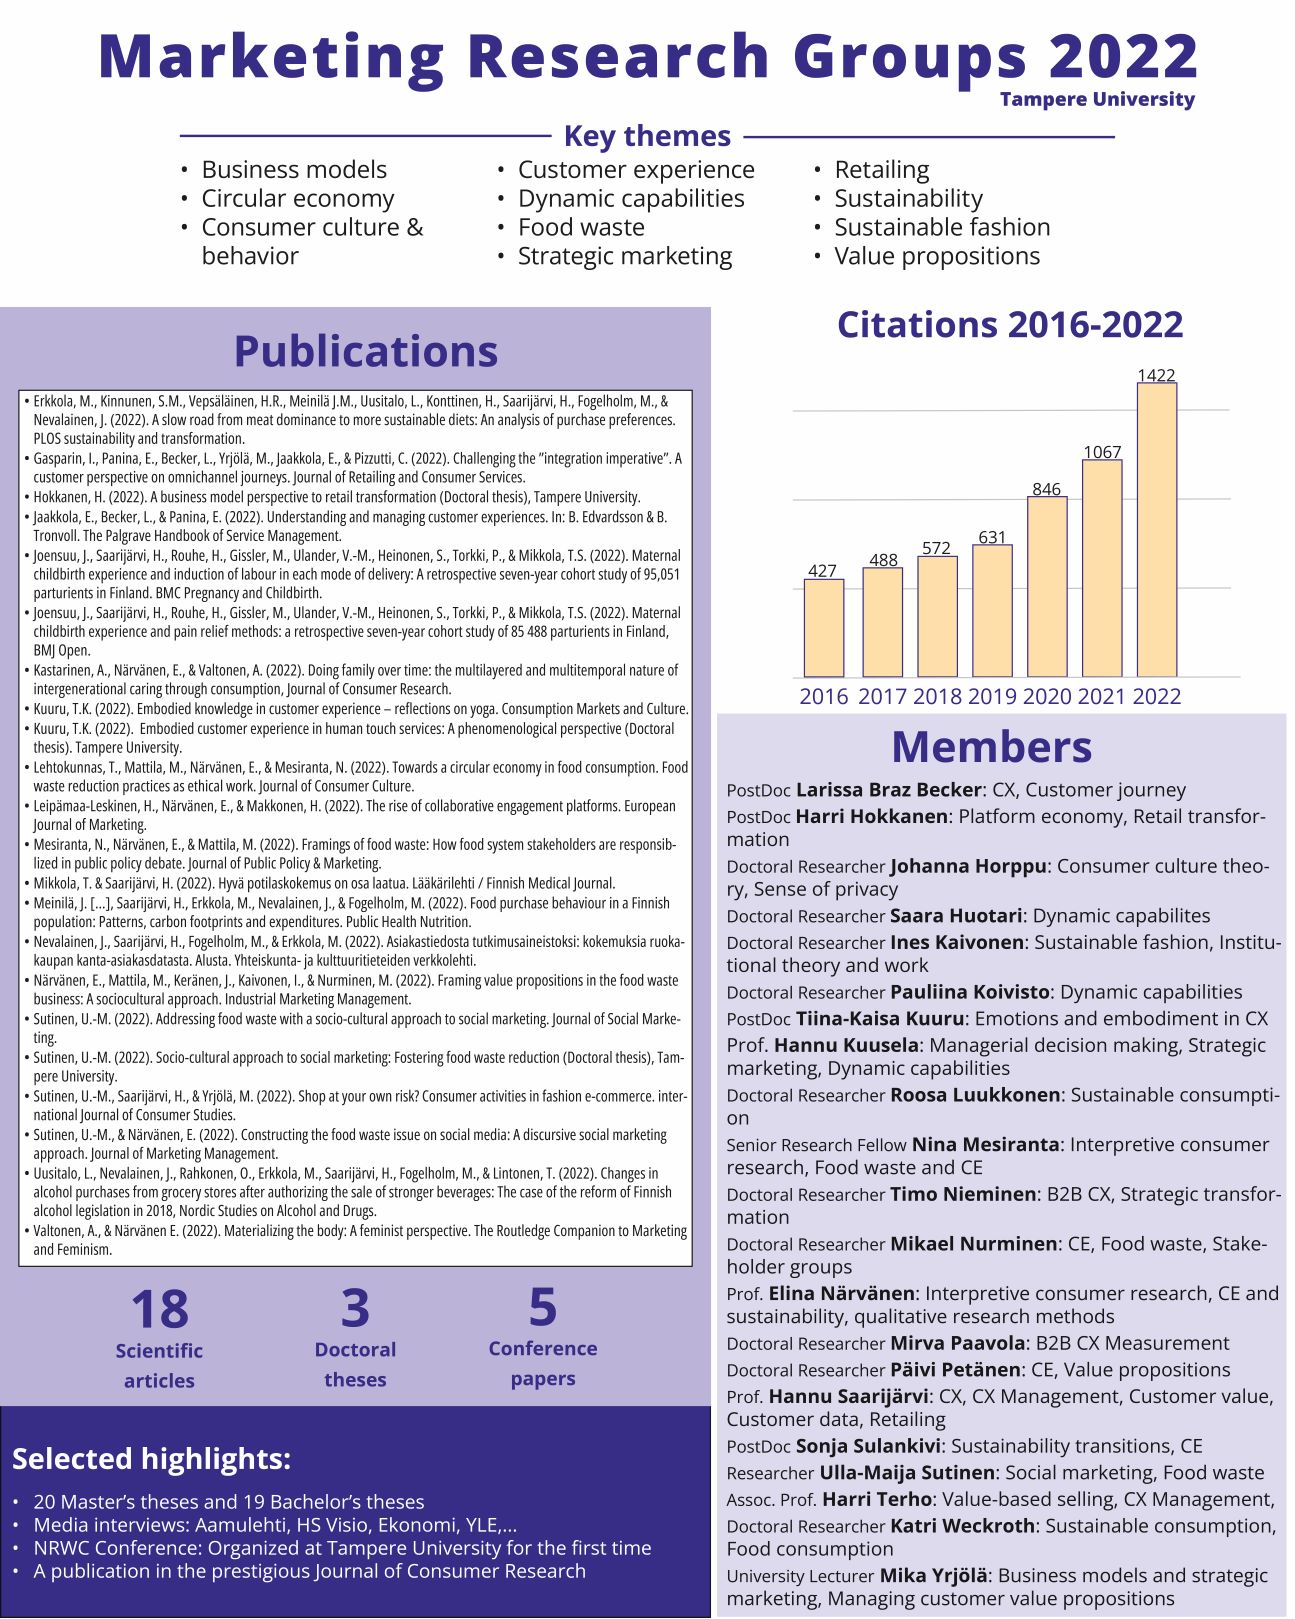 Describes the publications and other activities of the research groups in 2022